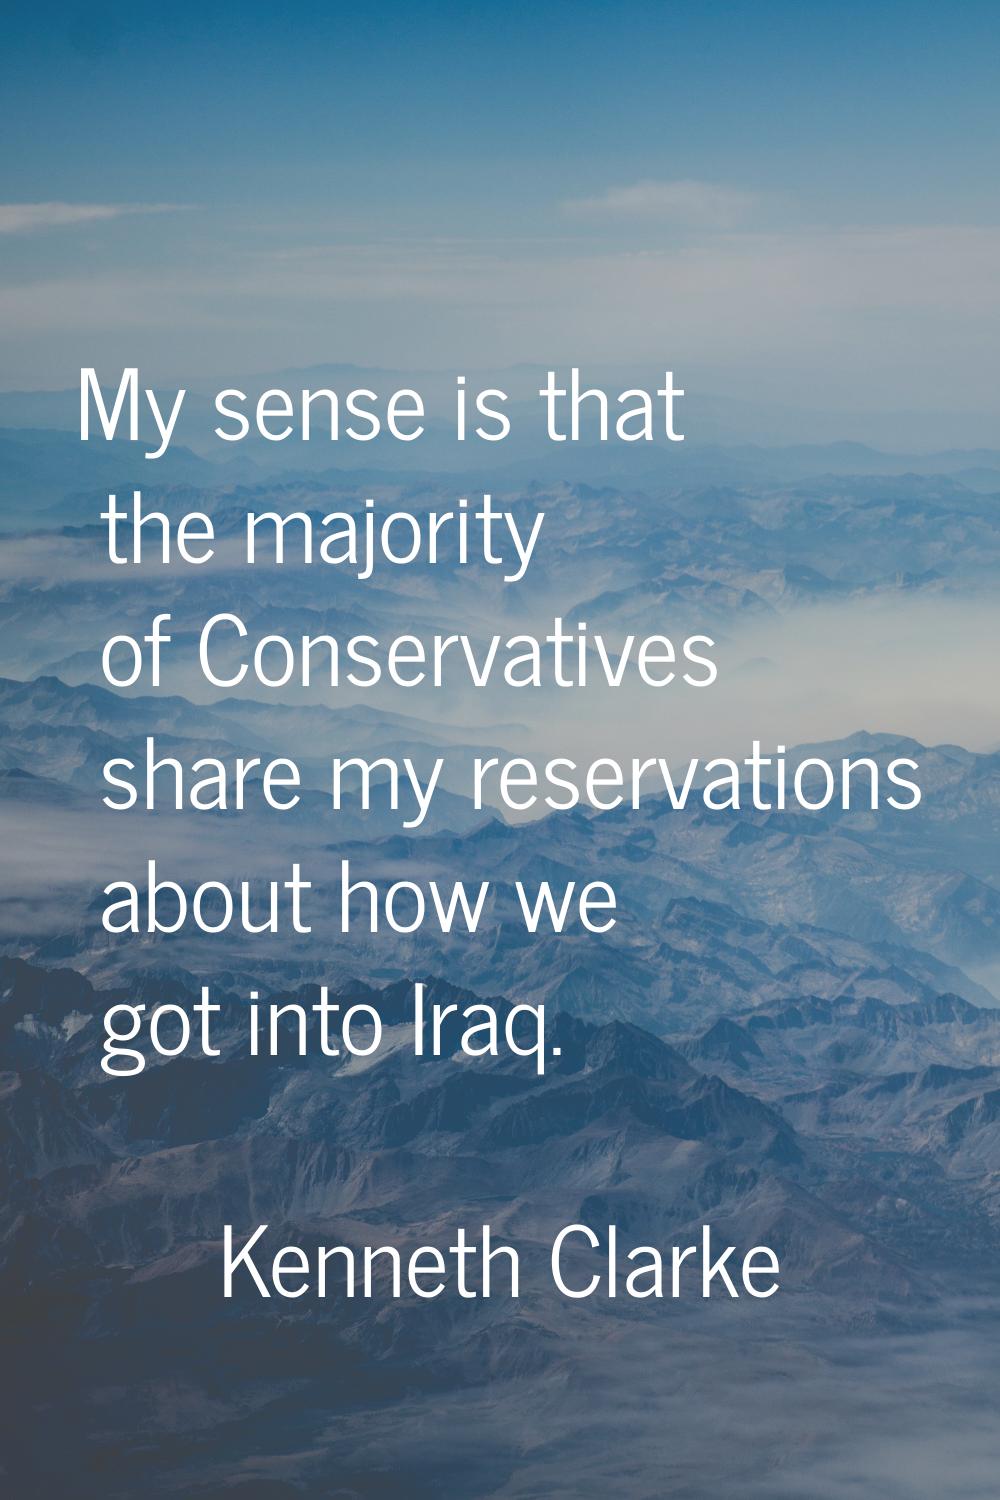 My sense is that the majority of Conservatives share my reservations about how we got into Iraq.